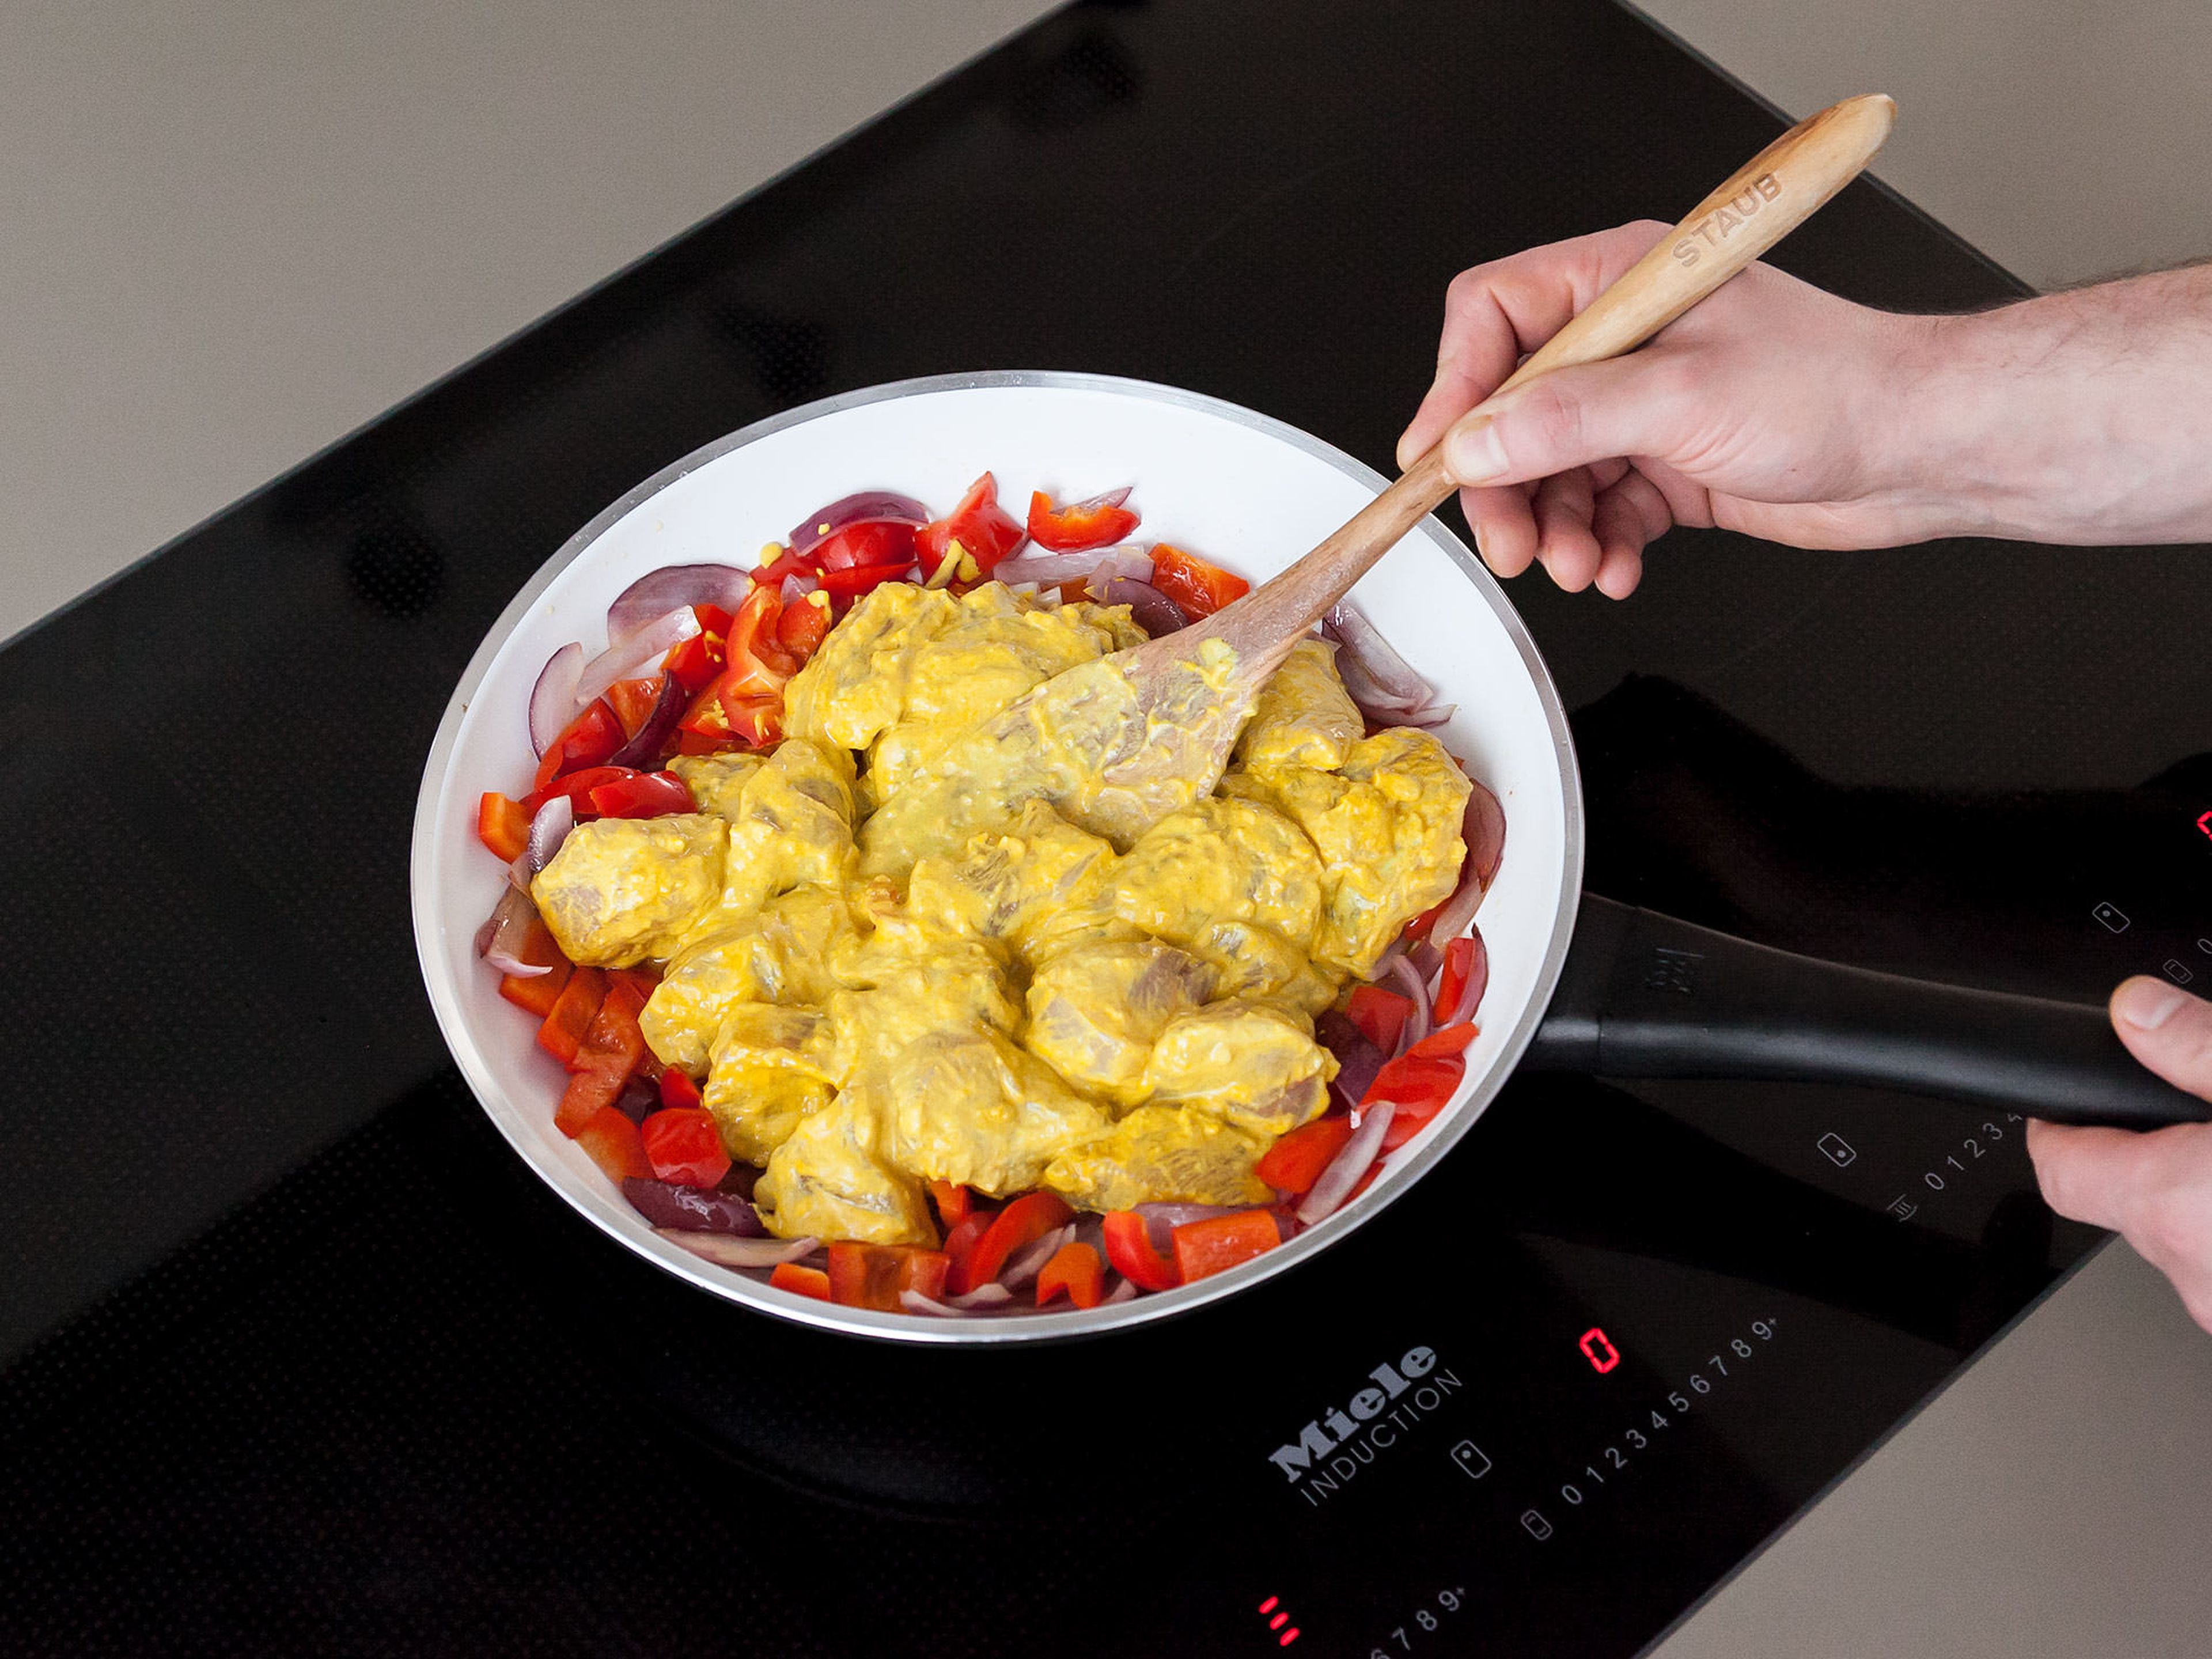 Heat the vegetable oil in a frying pan set over medium-high heat. Add diced onion and bell pepper to the pan and fry for approx. 5 min. Stirring often. Add chicken breast without the excess marinade and continue to sauté.